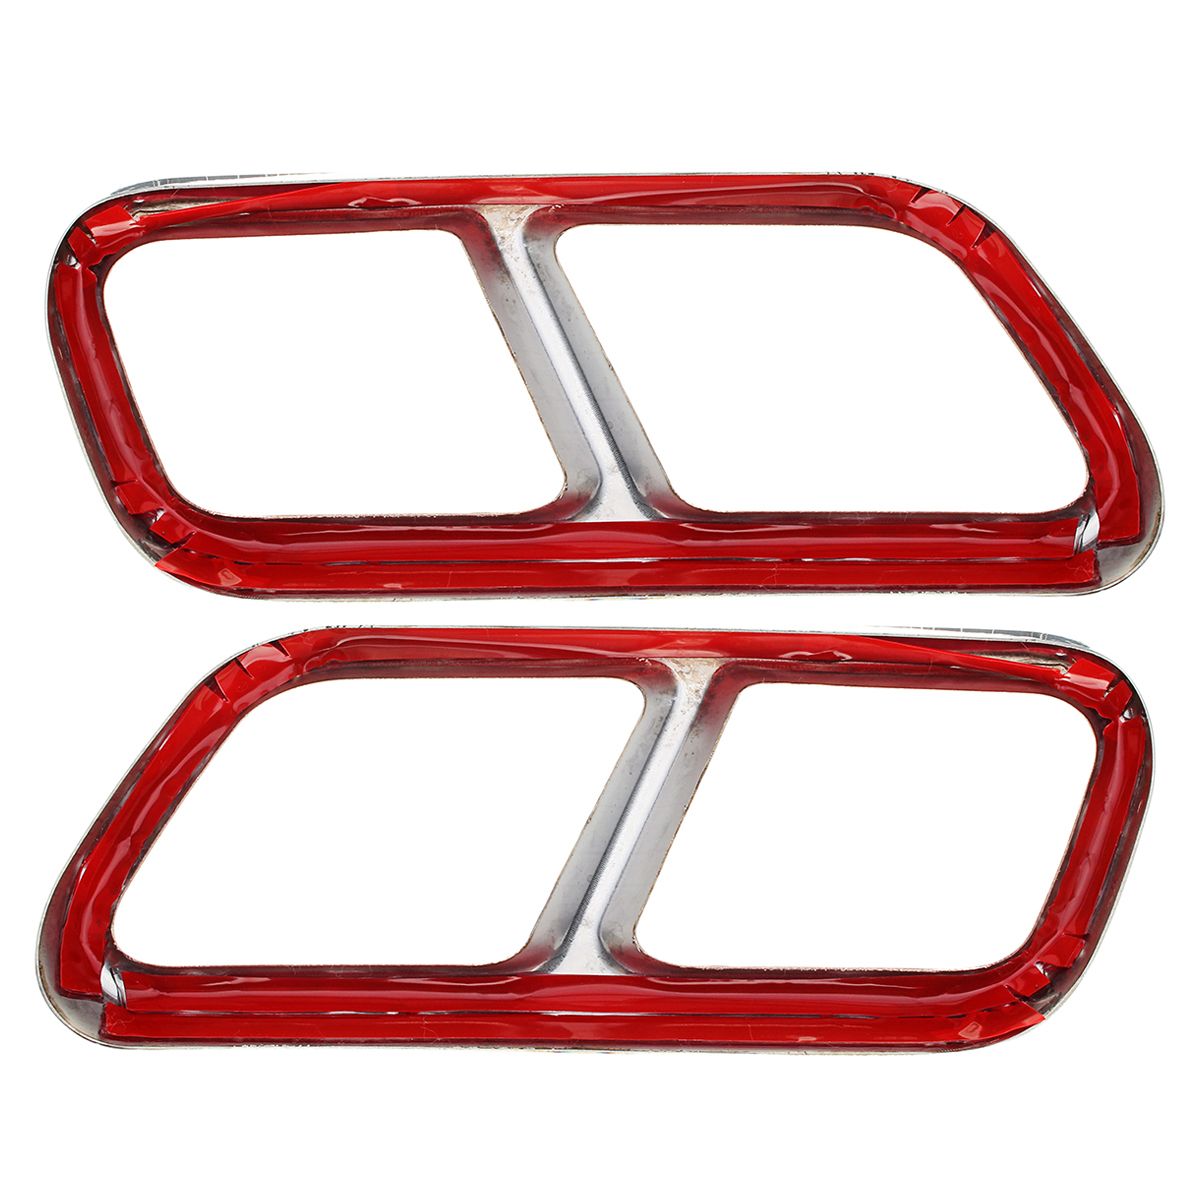 Pair-Rear-Dual-Exhaust-Pipe-Sticks-Covers-For-Mercedes-Benz-S-class--W221-W222-C217-1714087